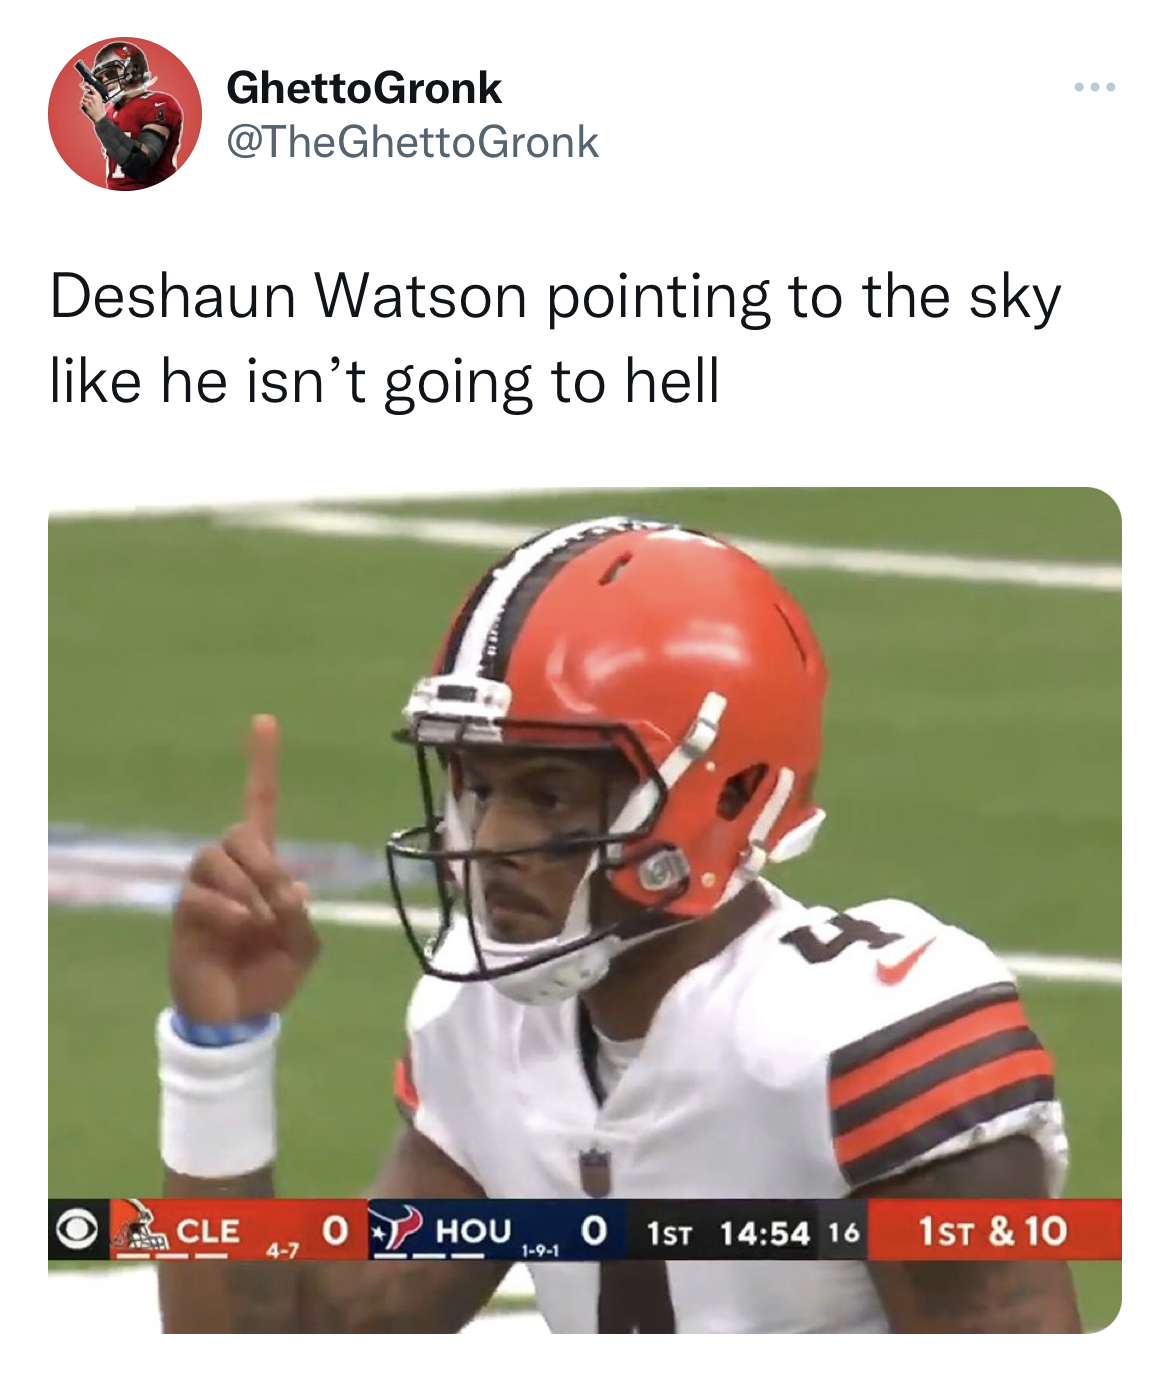 Tweets roasting celebs - player - GhettoGronk Gronk Deshaun Watson pointing to the sky he isn't going to hell Cle 0 Hou O 1ST 16 1ST & 10 47